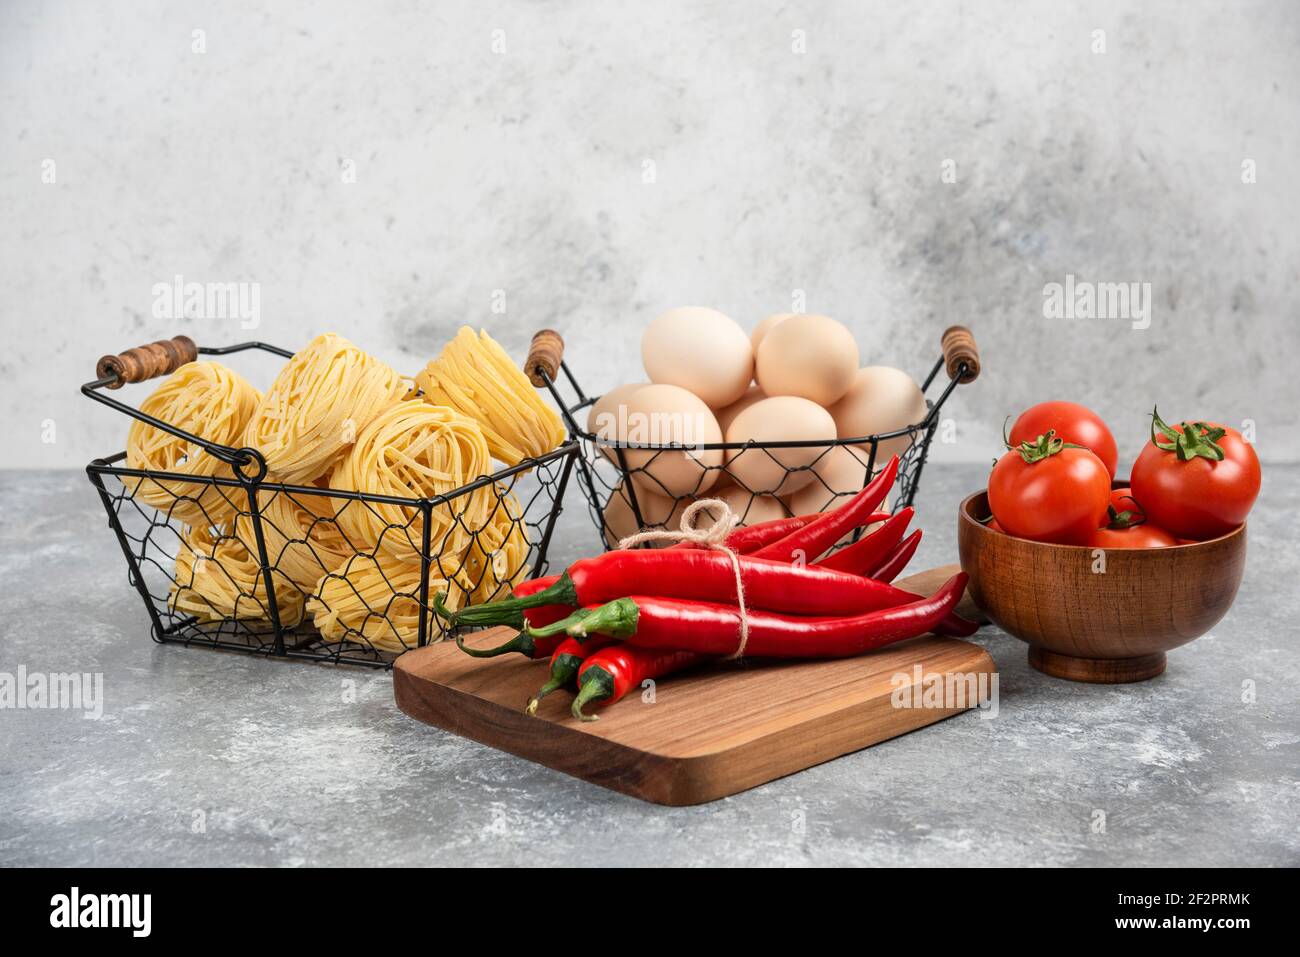 Basket of raw noodles, tomatoes, chili peppers and eggs on marble surface Stock Photo